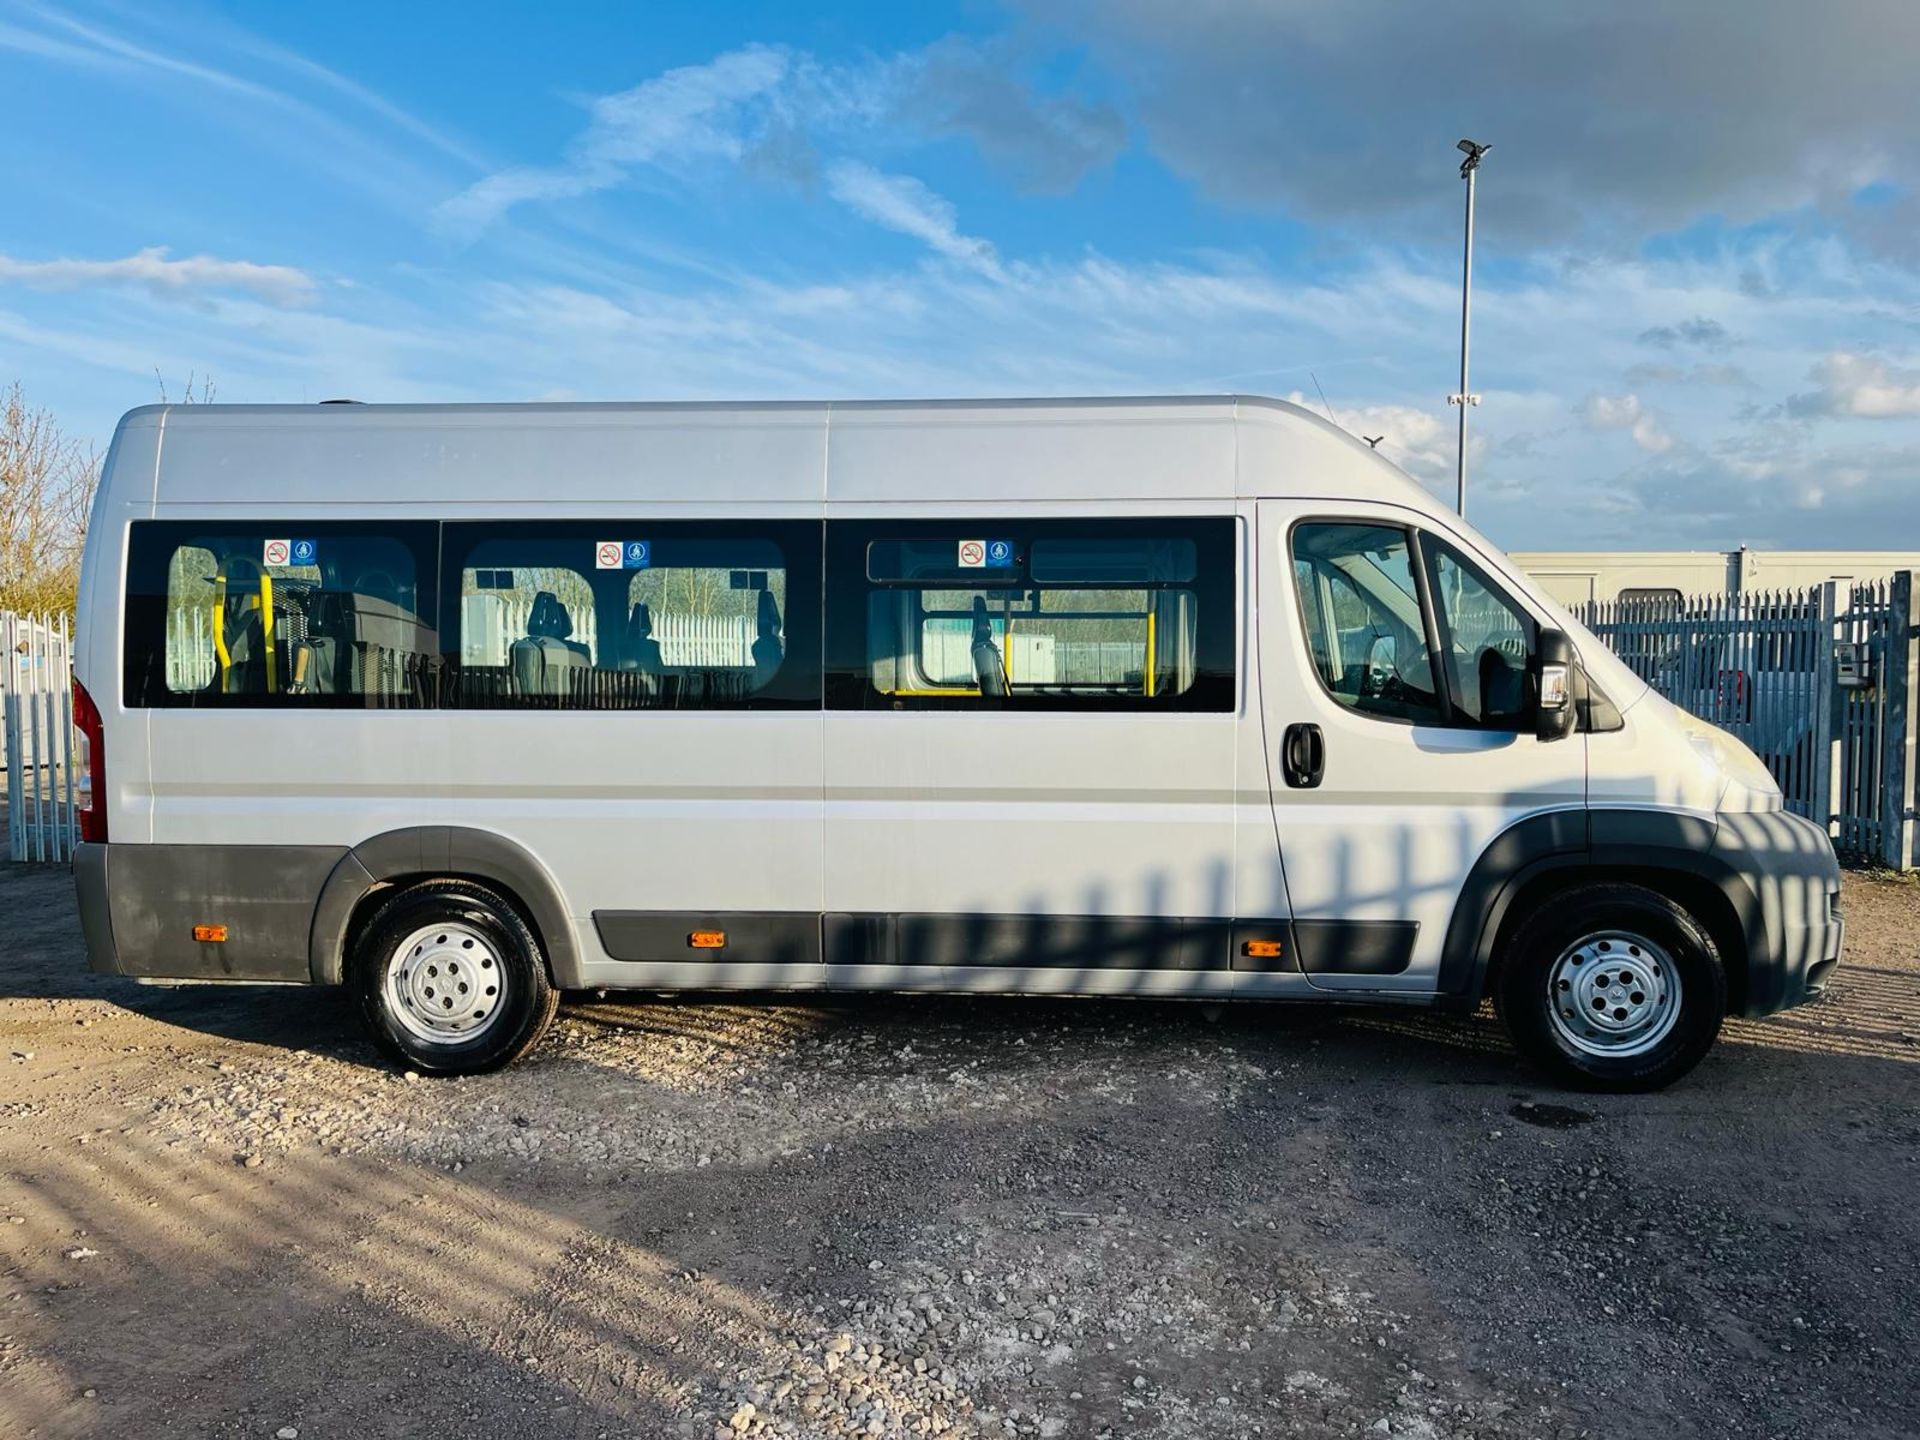 ** ON SALE ** Peugeot Boxer 435 2.0 HDI Minibus L4 H2 2011'11 Reg' -1 Former Keeper-Extra Long Wheel - Image 16 of 31